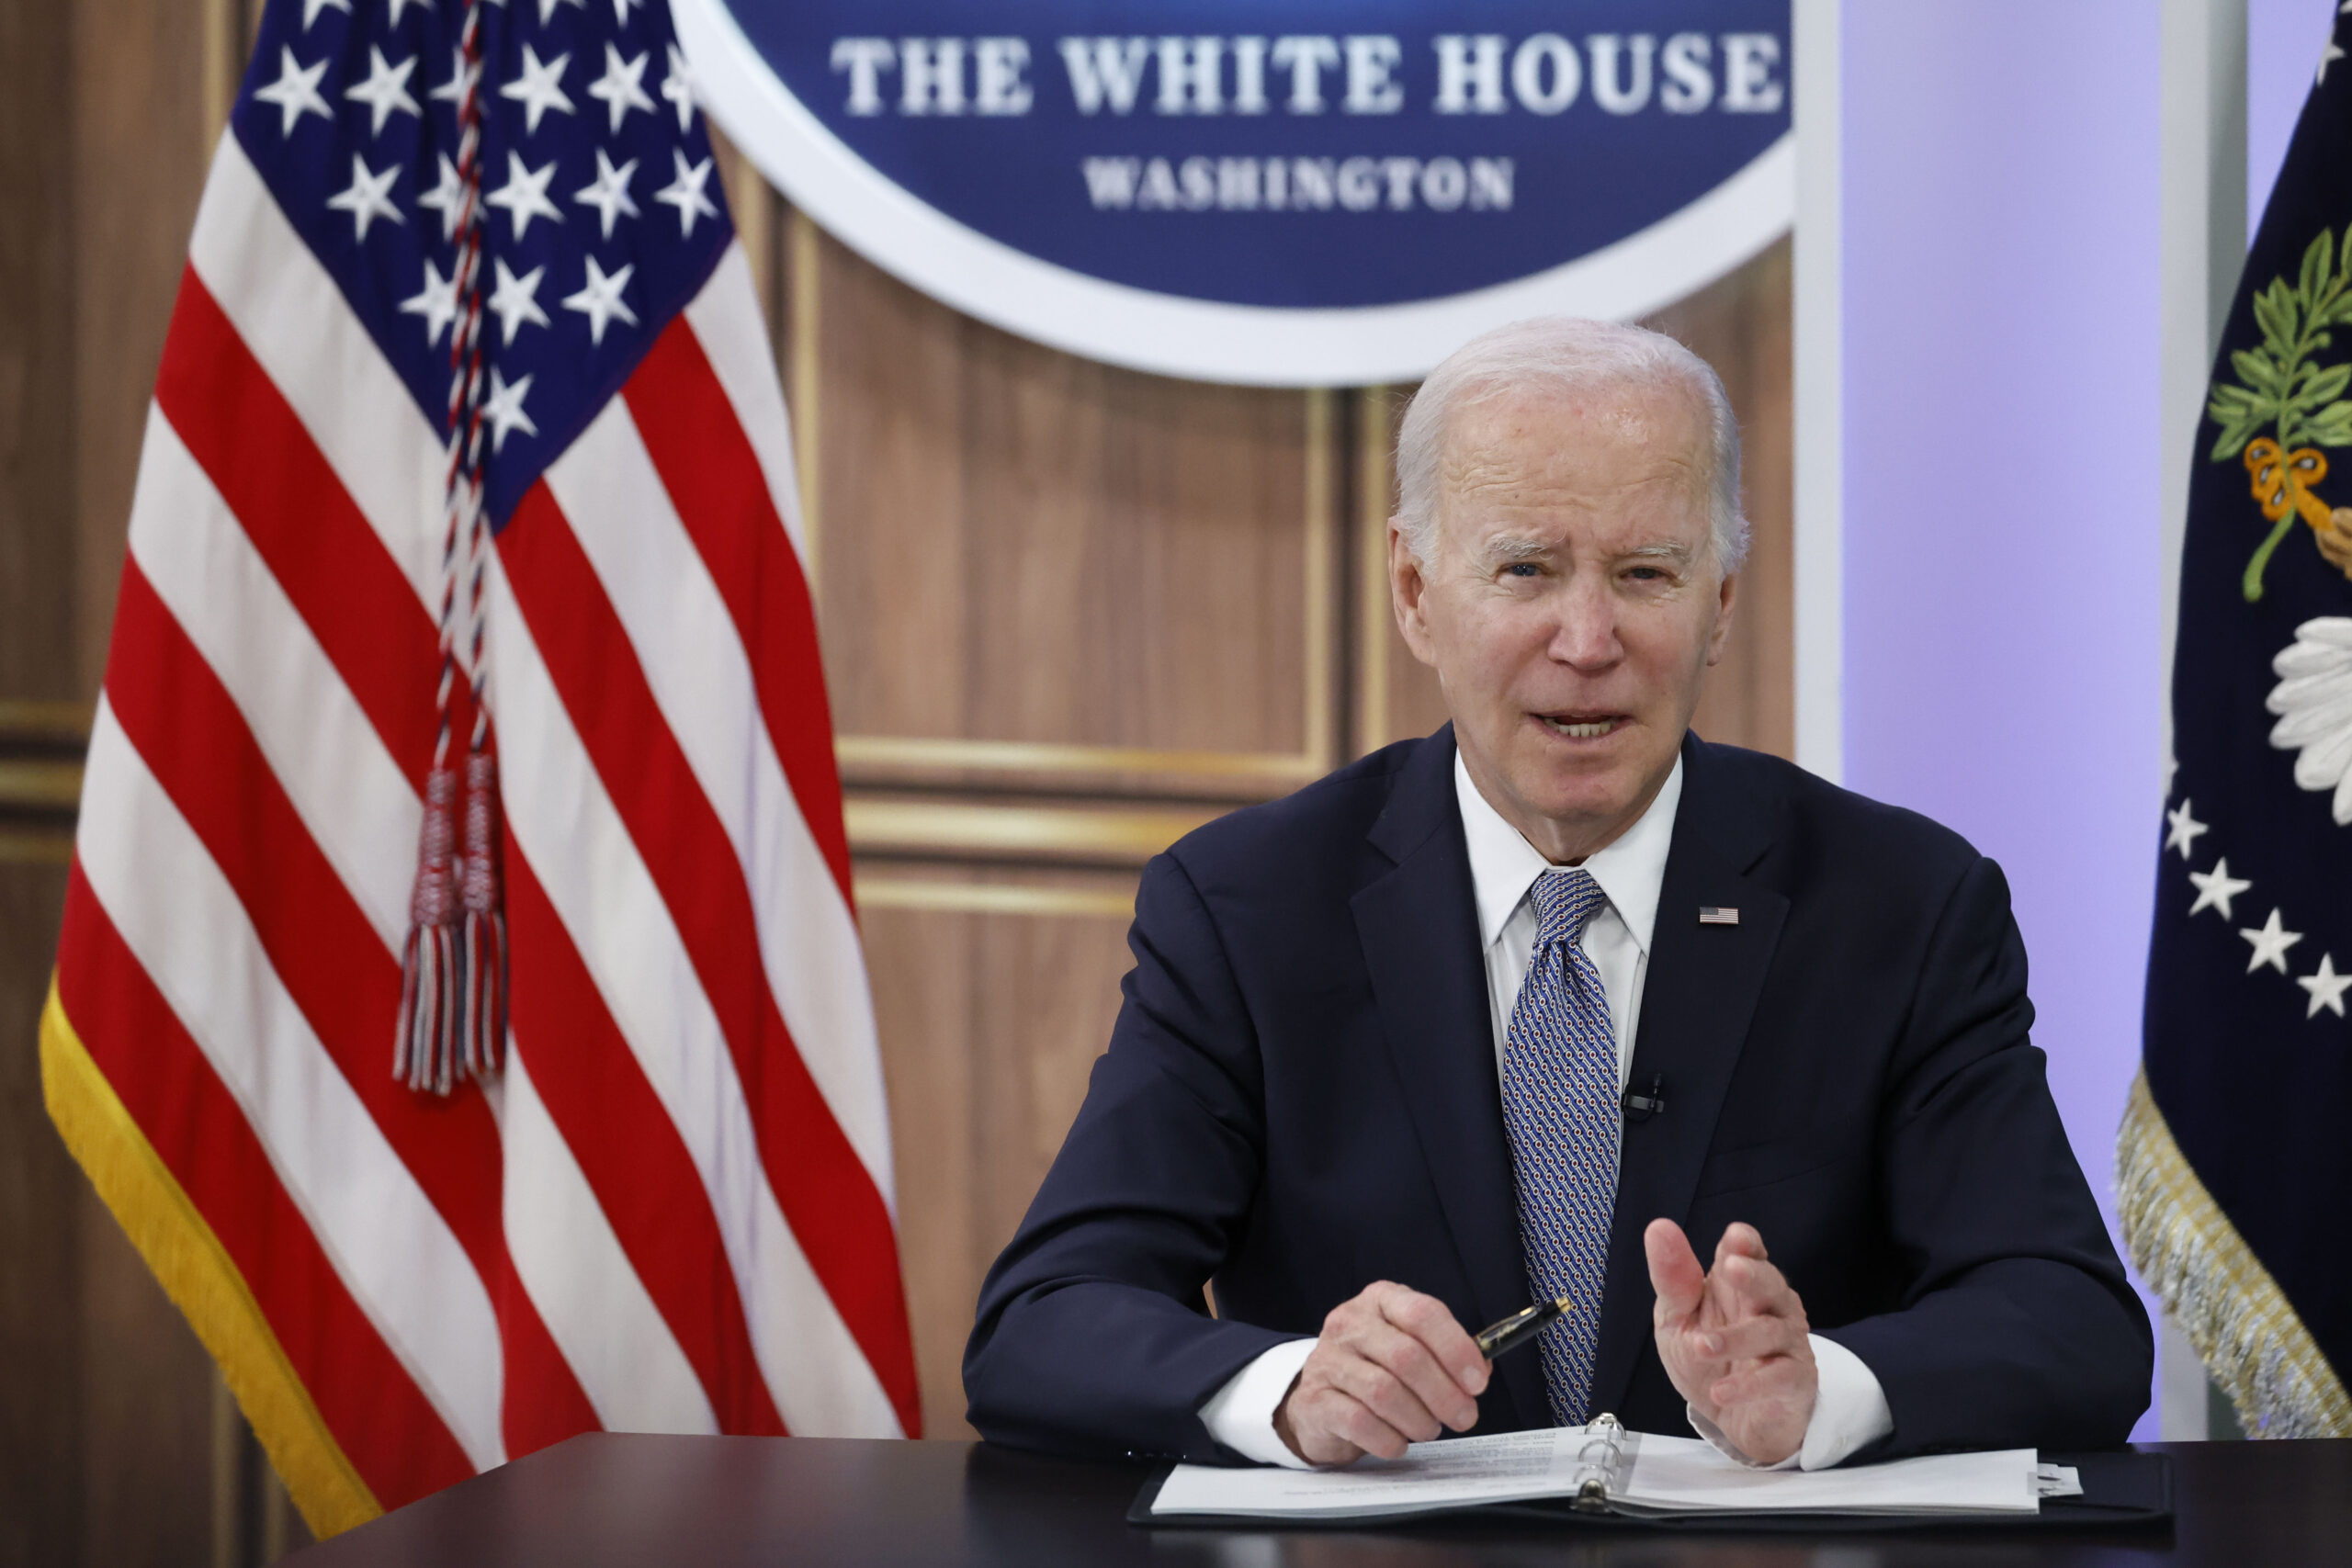 Biden Signs Executive Order To Make Entire Government Focus On ‘Environmental Justice’